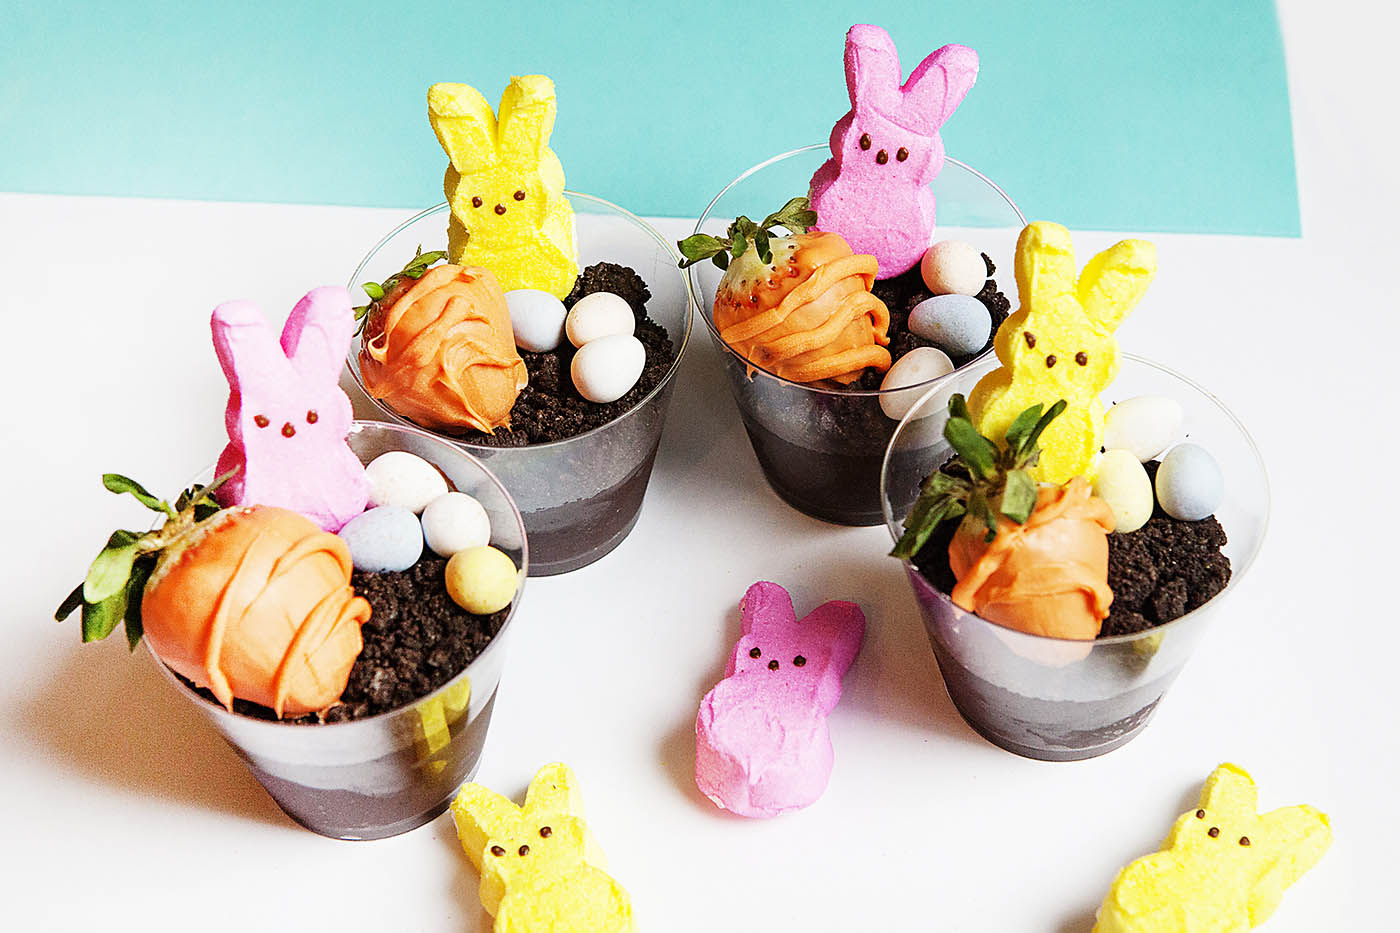 Easy Easter pudding cups - how cute are these, and they are so simple to put together!